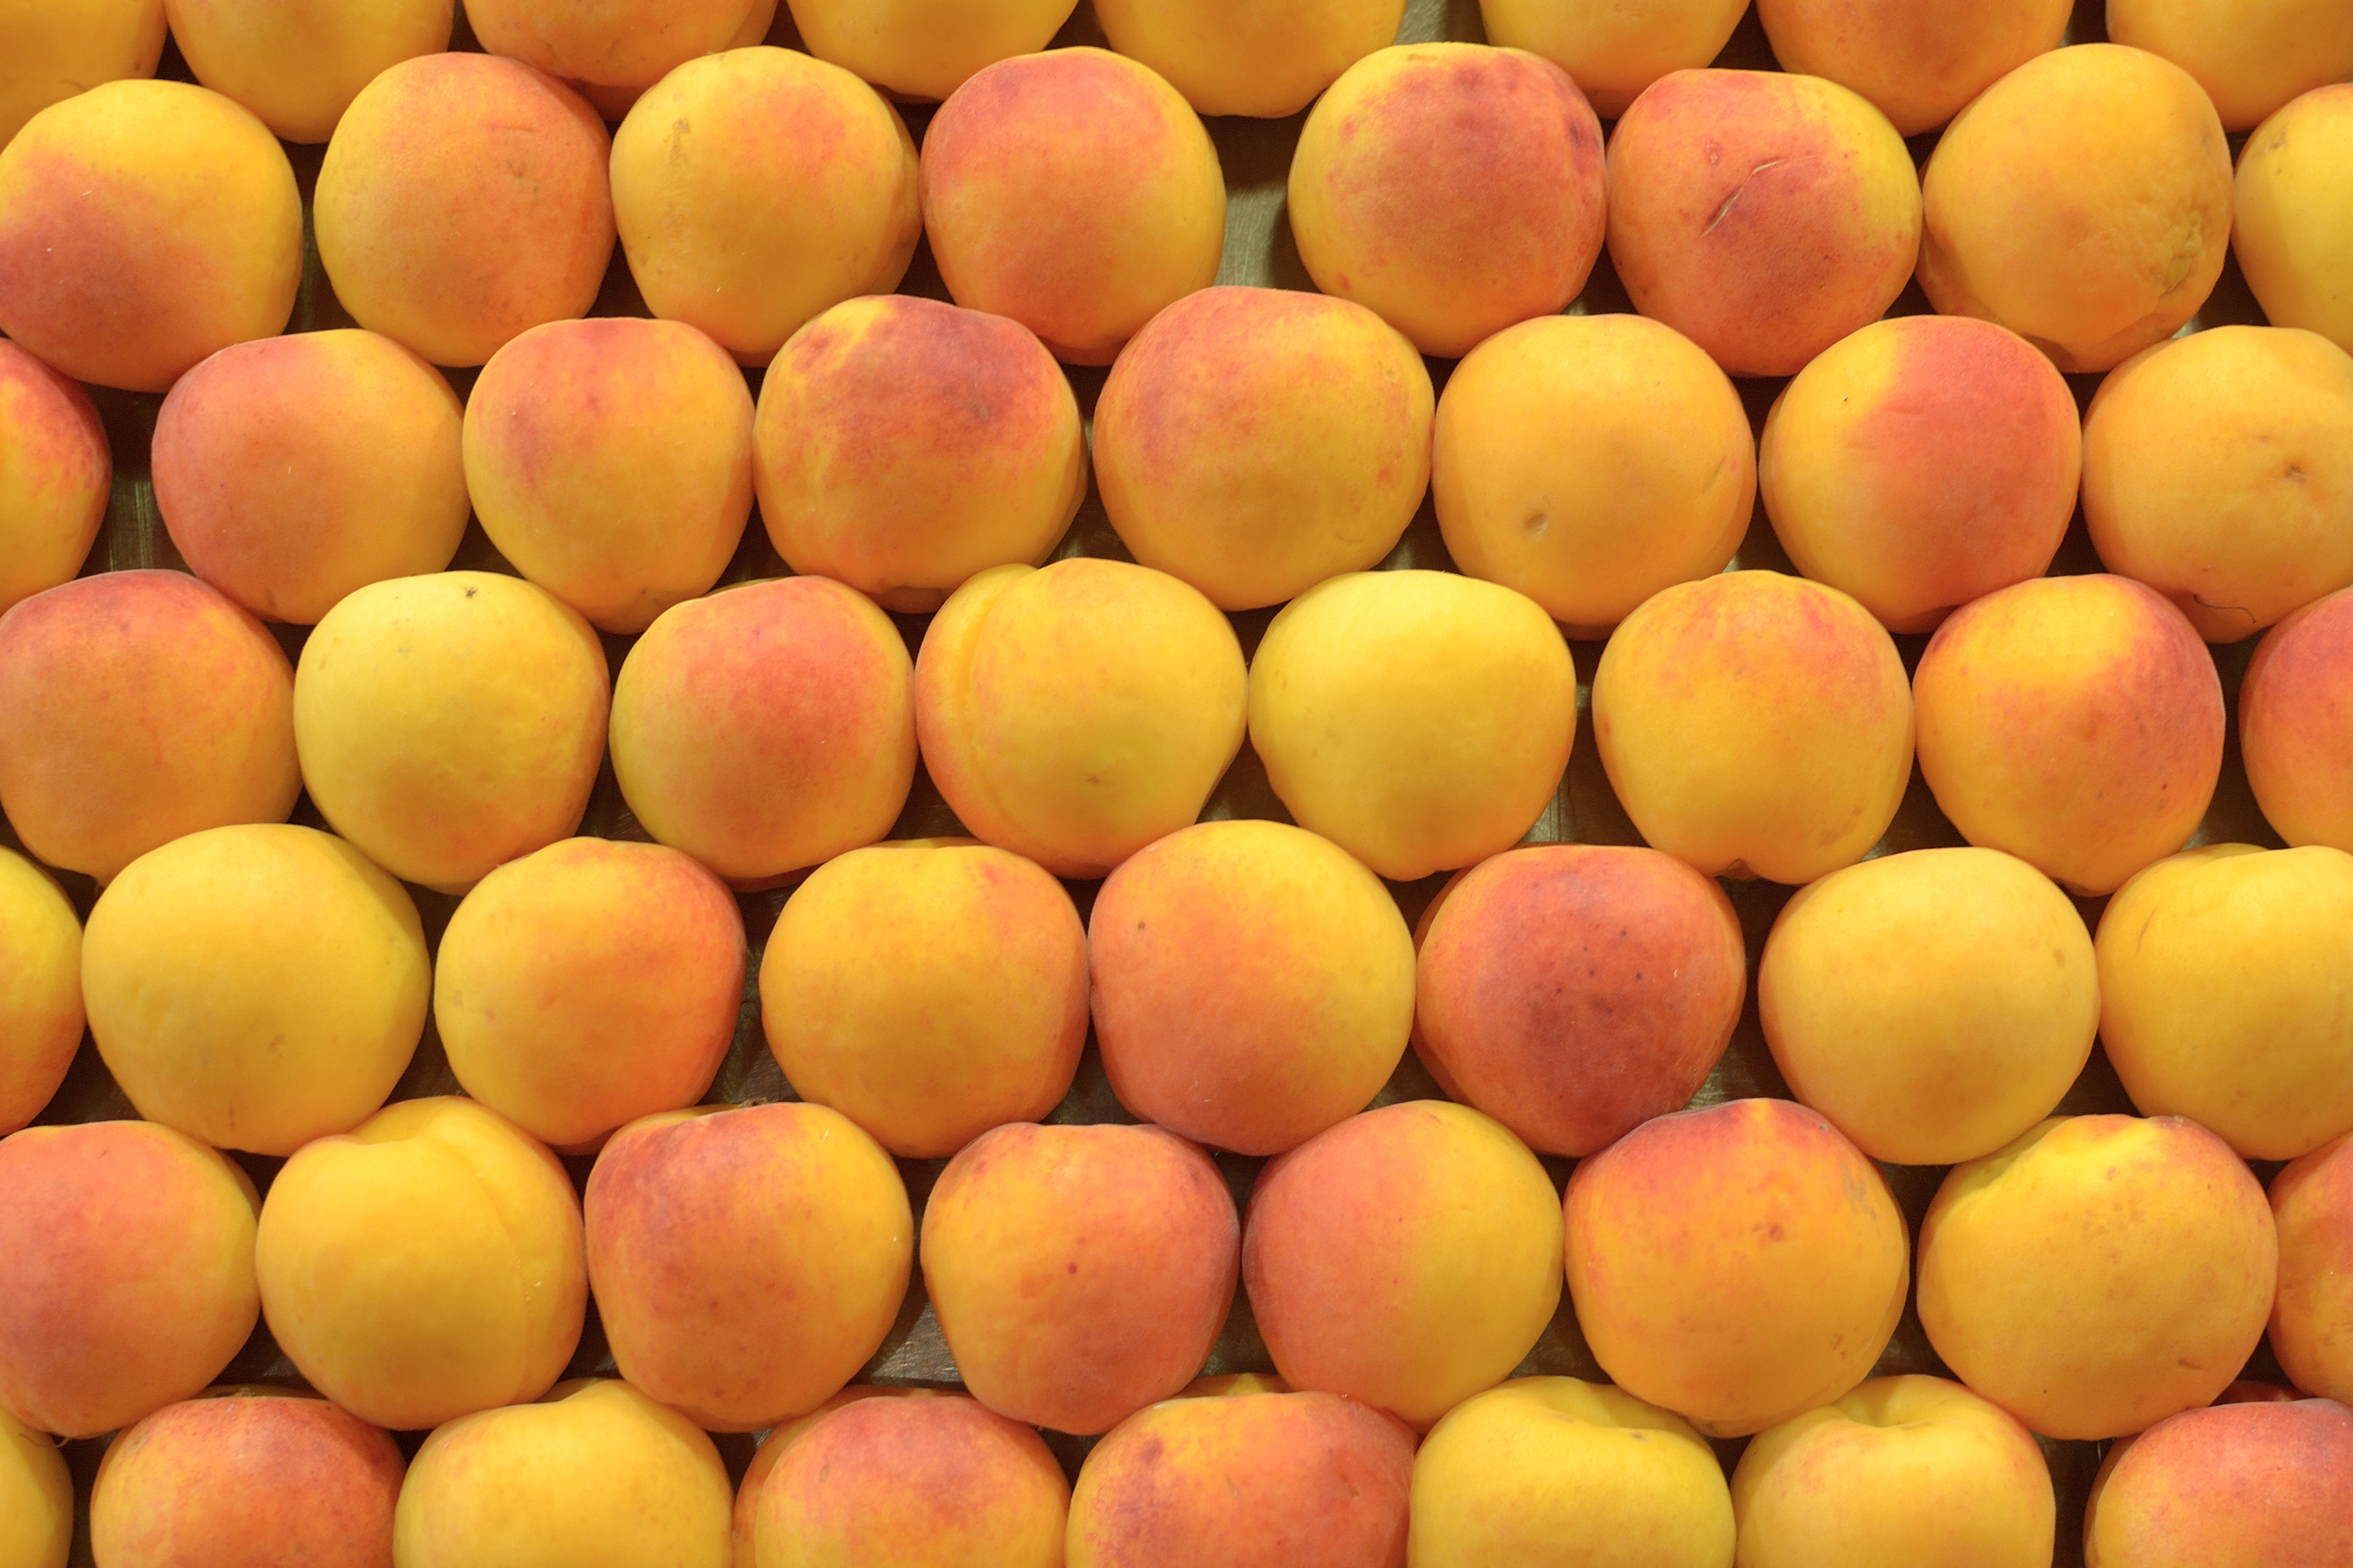 If you can smell peaches, they’re ripe. While peach season can peak in states at different times, you’re definitely going to see some especially juicy ones in July. Peaches should be firm and without bruises on the outside.